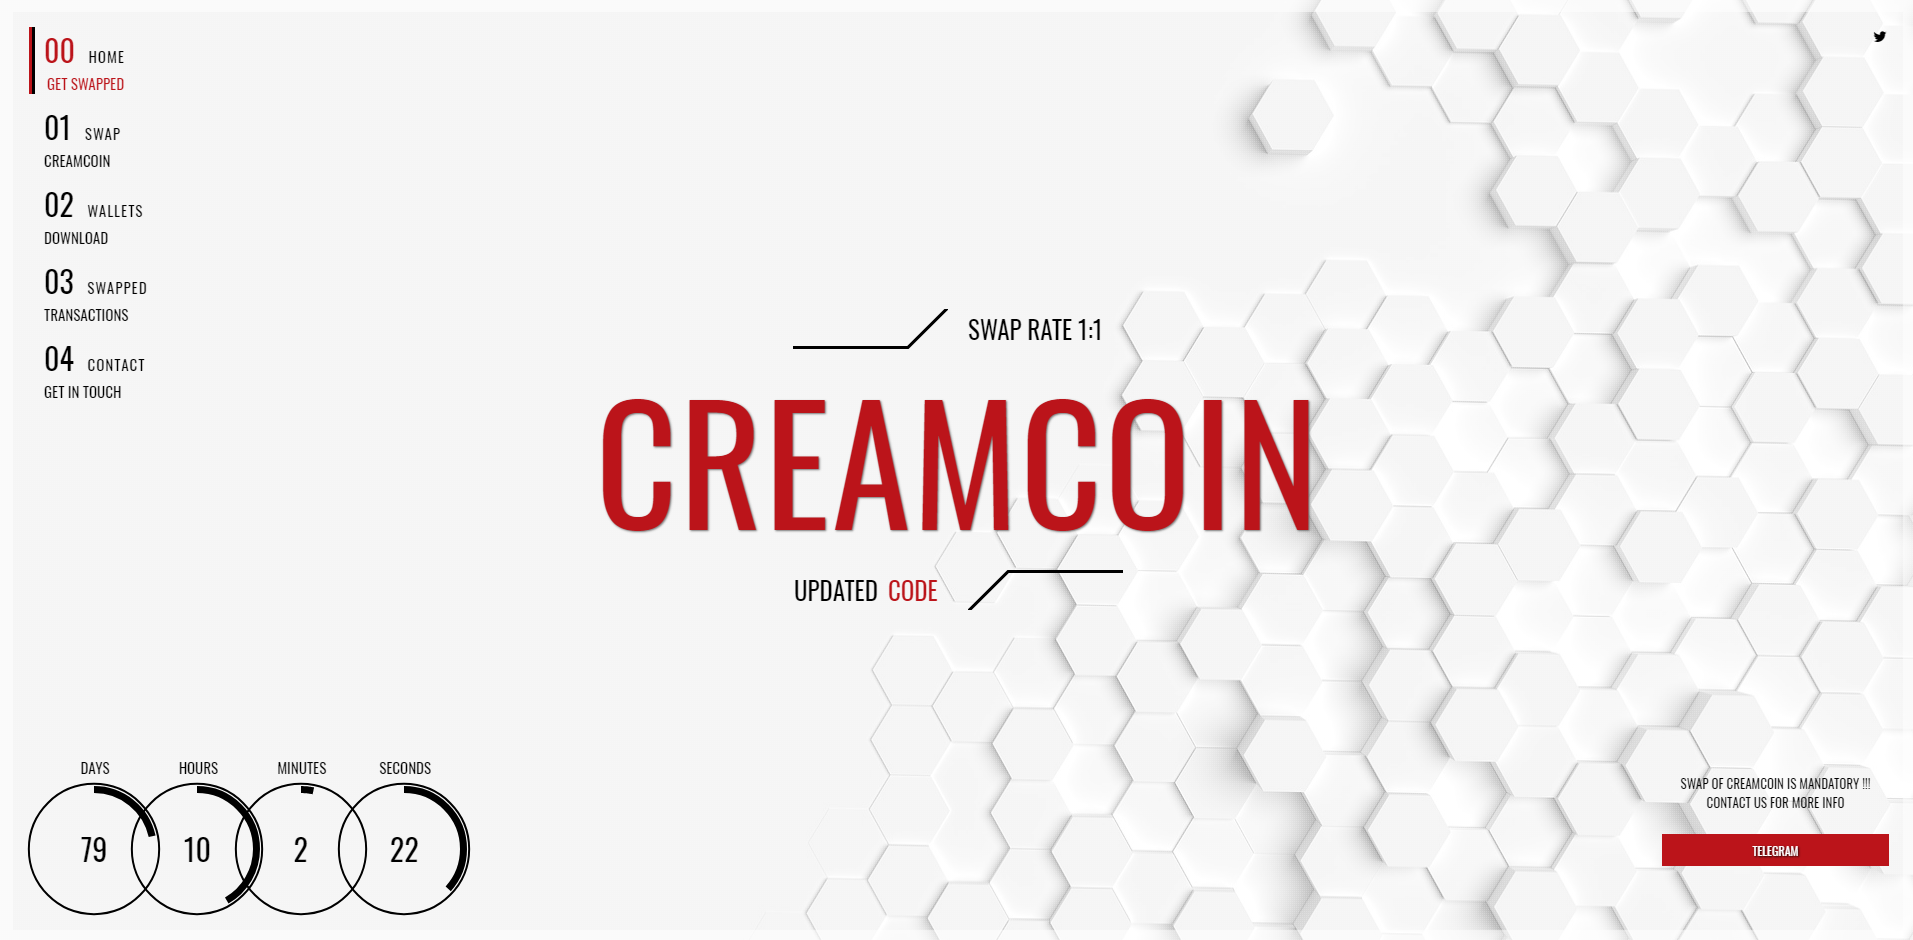 CREAMcoin Hard Fork and Swap to Code Version 0.17.1.0